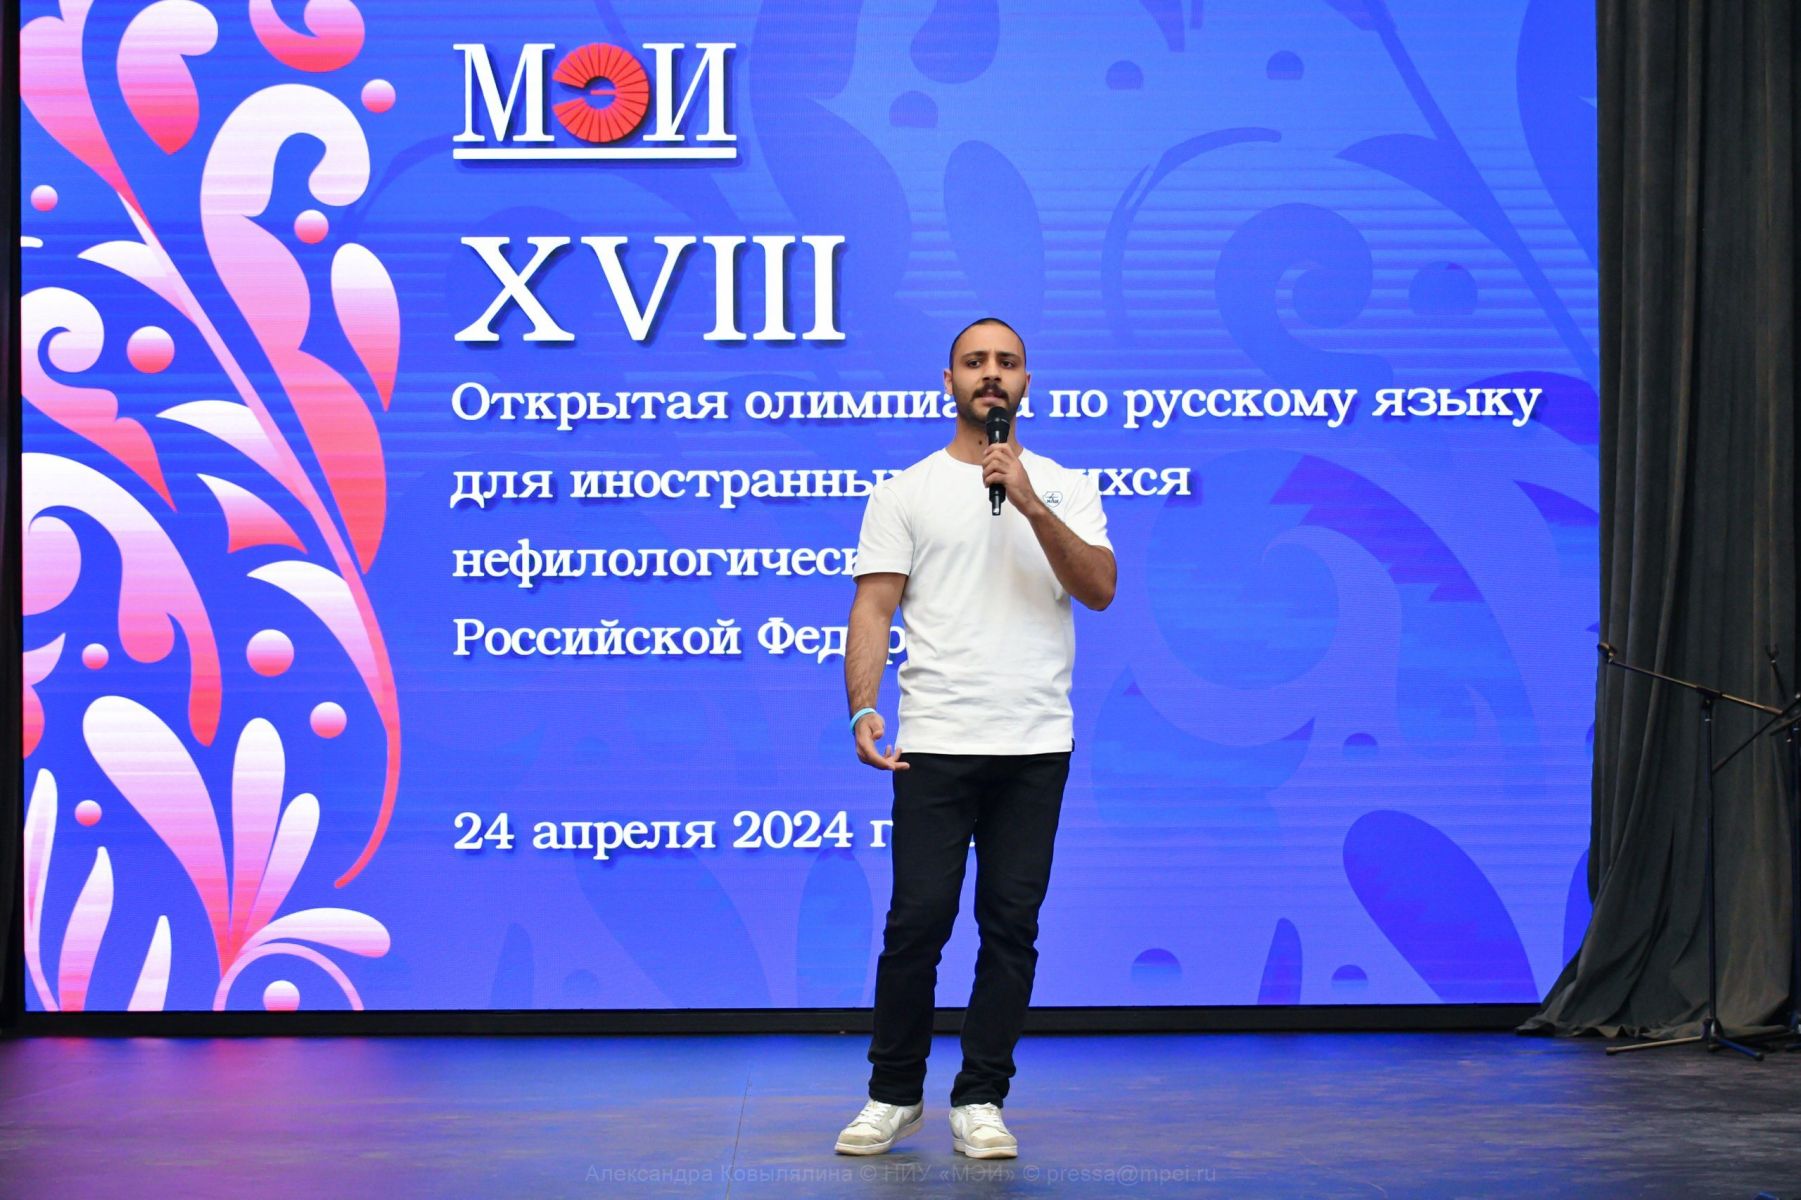 MAI students took part in the XVIII Open Olympiad in the Russian language 